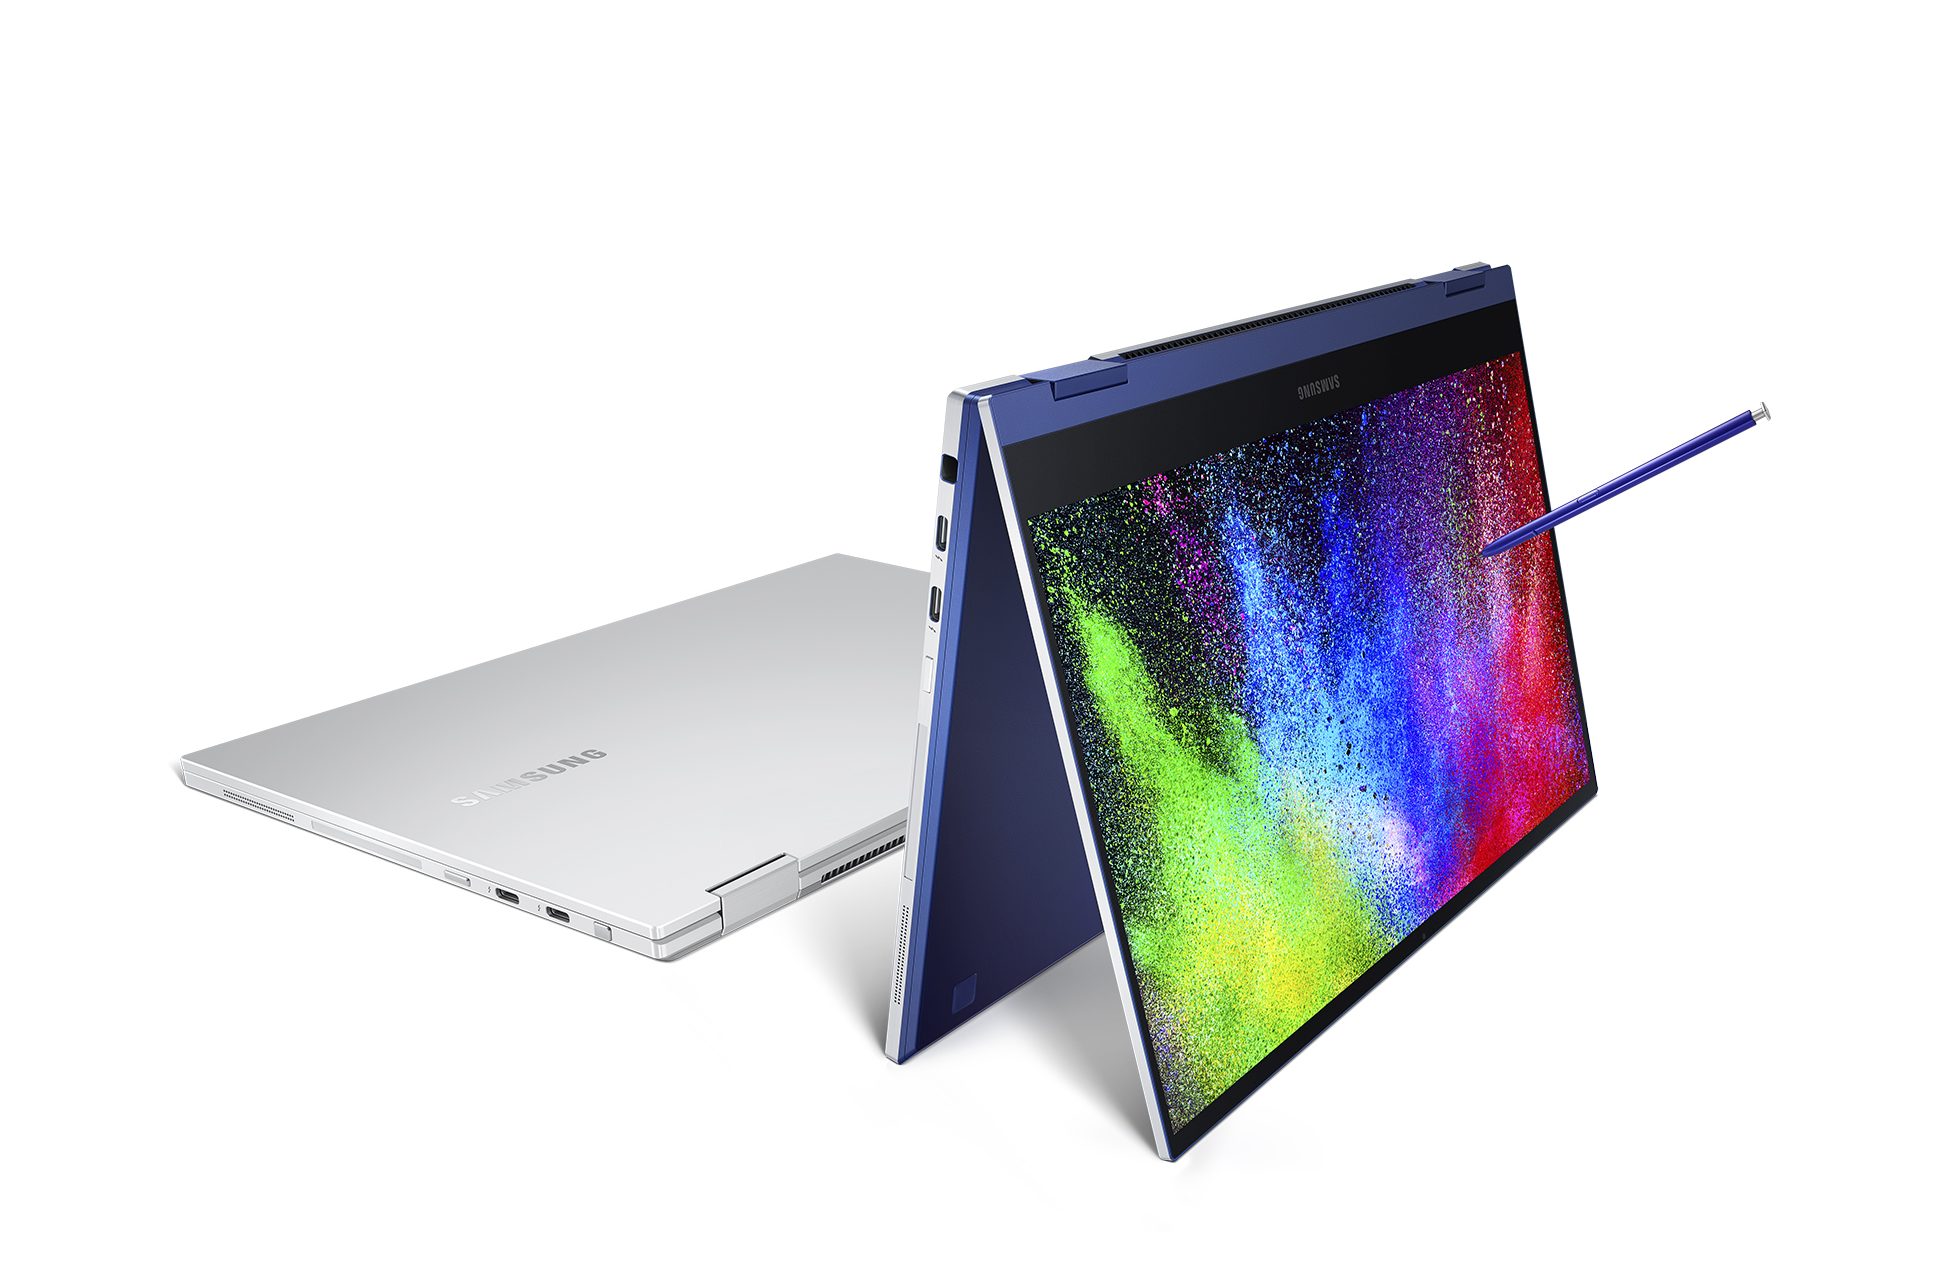 Samsung files trademark for Galaxy Book Flex 5G, Could launch at SDC 2020